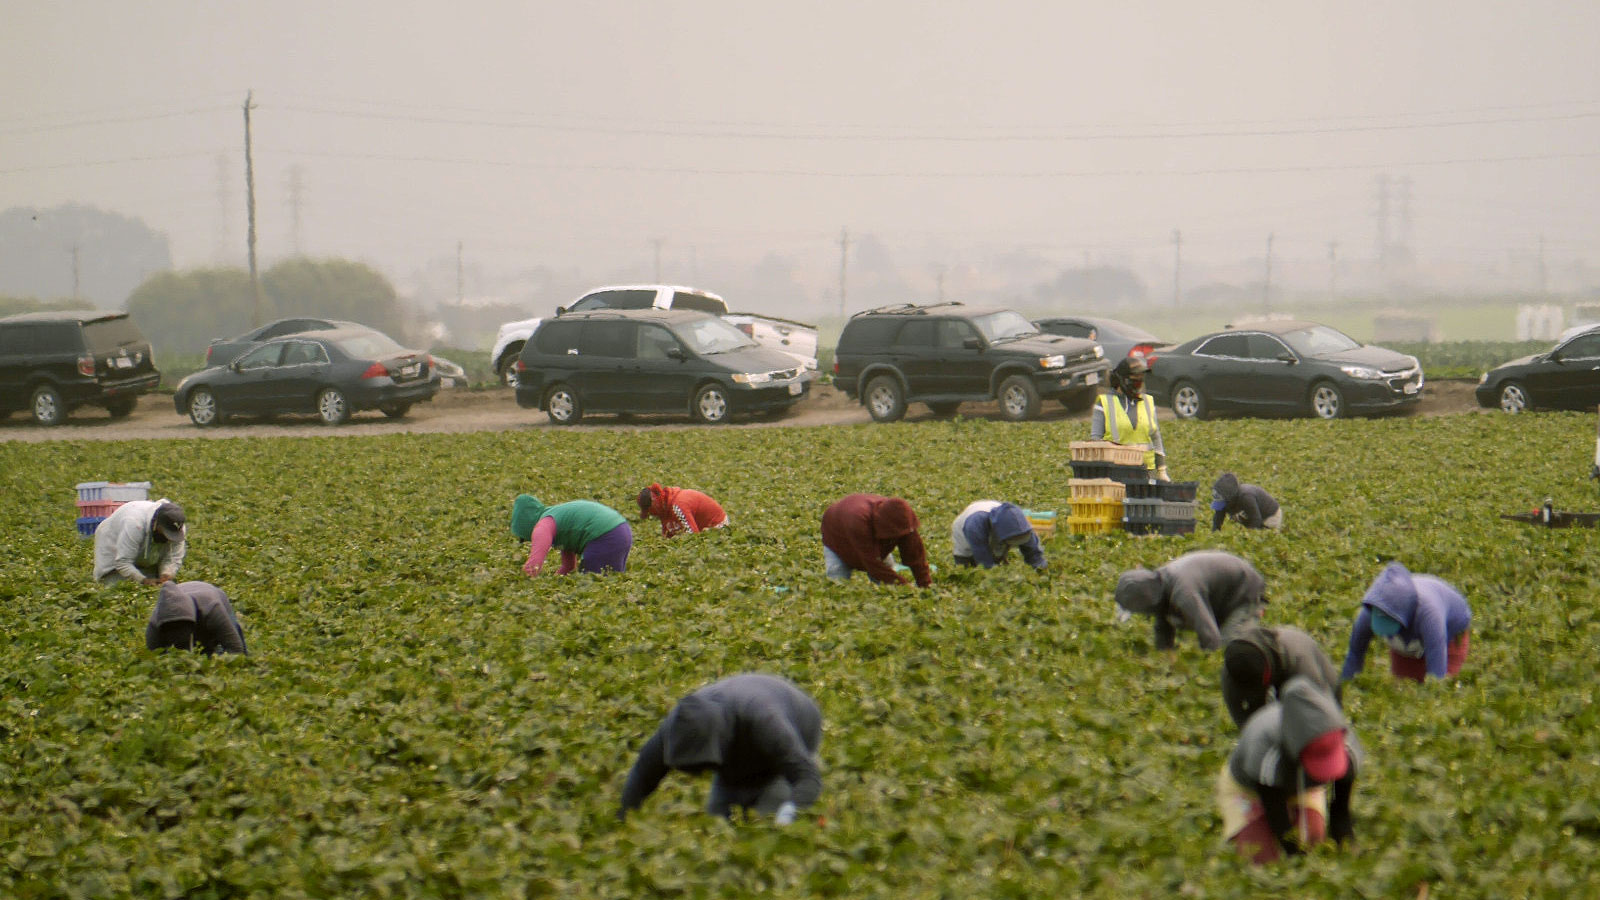 Group of farm workers harvesting in a field with cars parked next to the field, and a hazy gray sky behind them